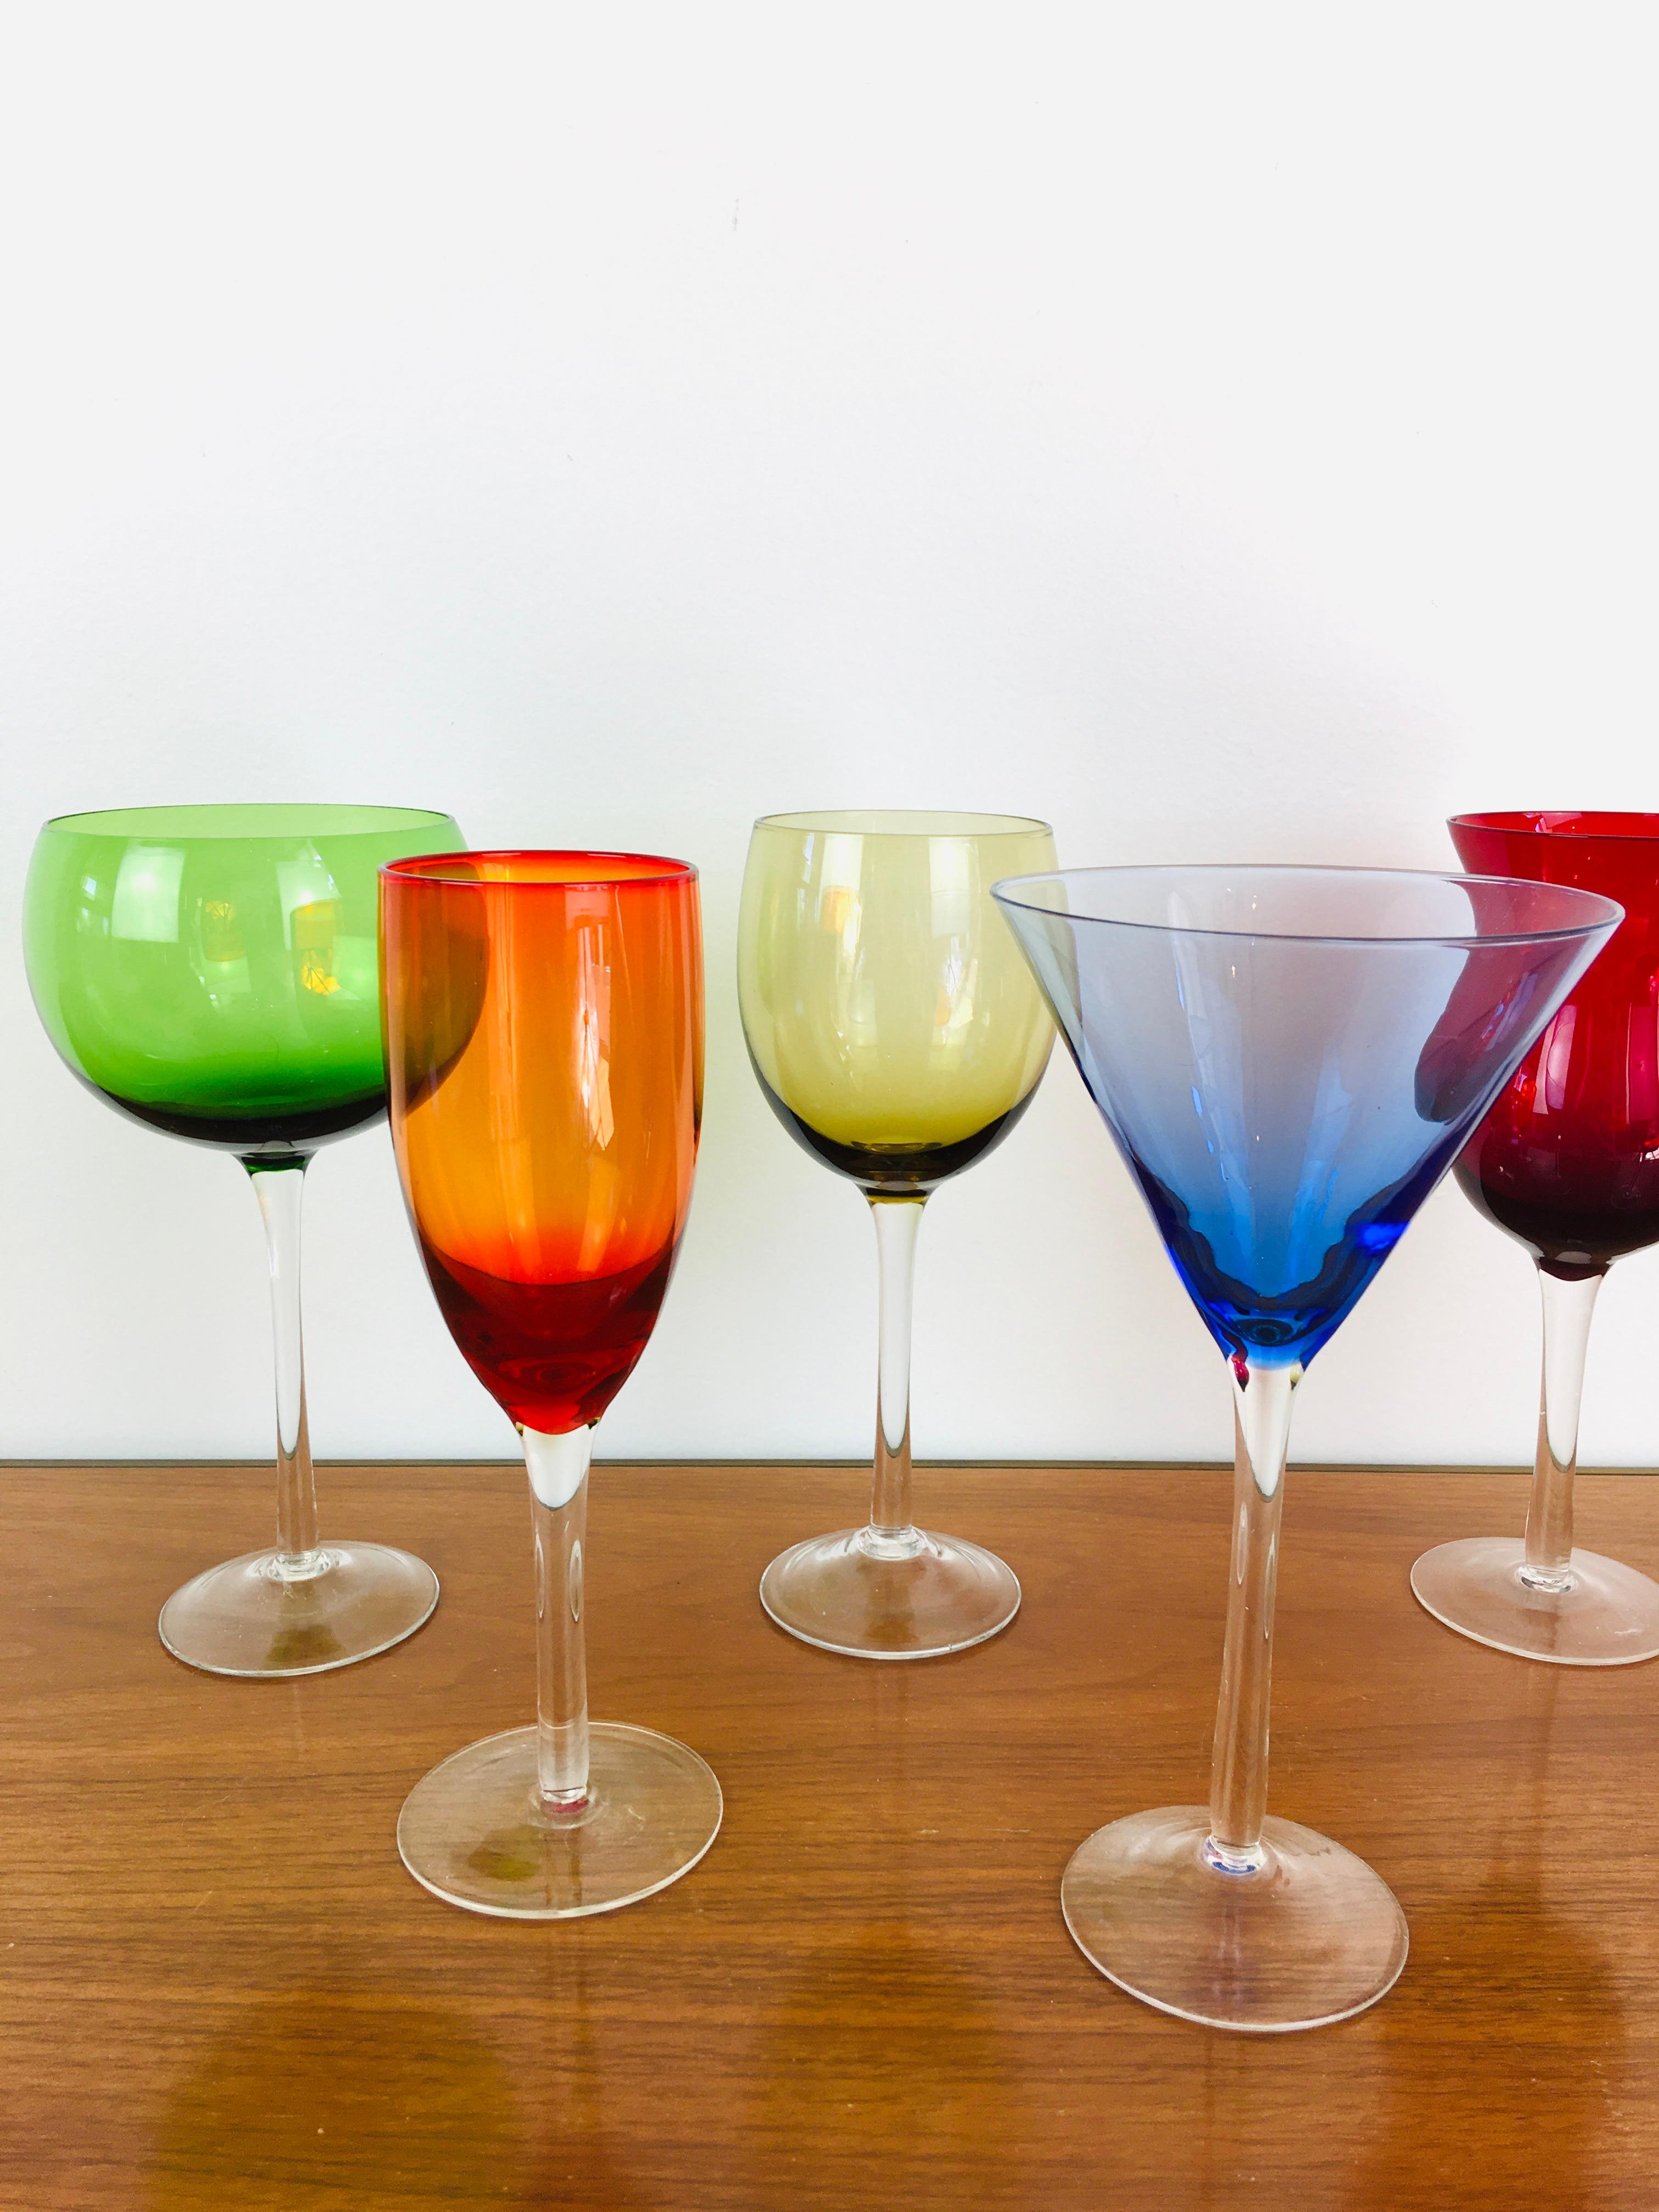 Fun set of colorful crystal cocktail & wine glasses.
Set of 6, no 2 are alike and measurements vary.
Colorful crystal with clear stems.
Unmarked.
Great vintage condition.